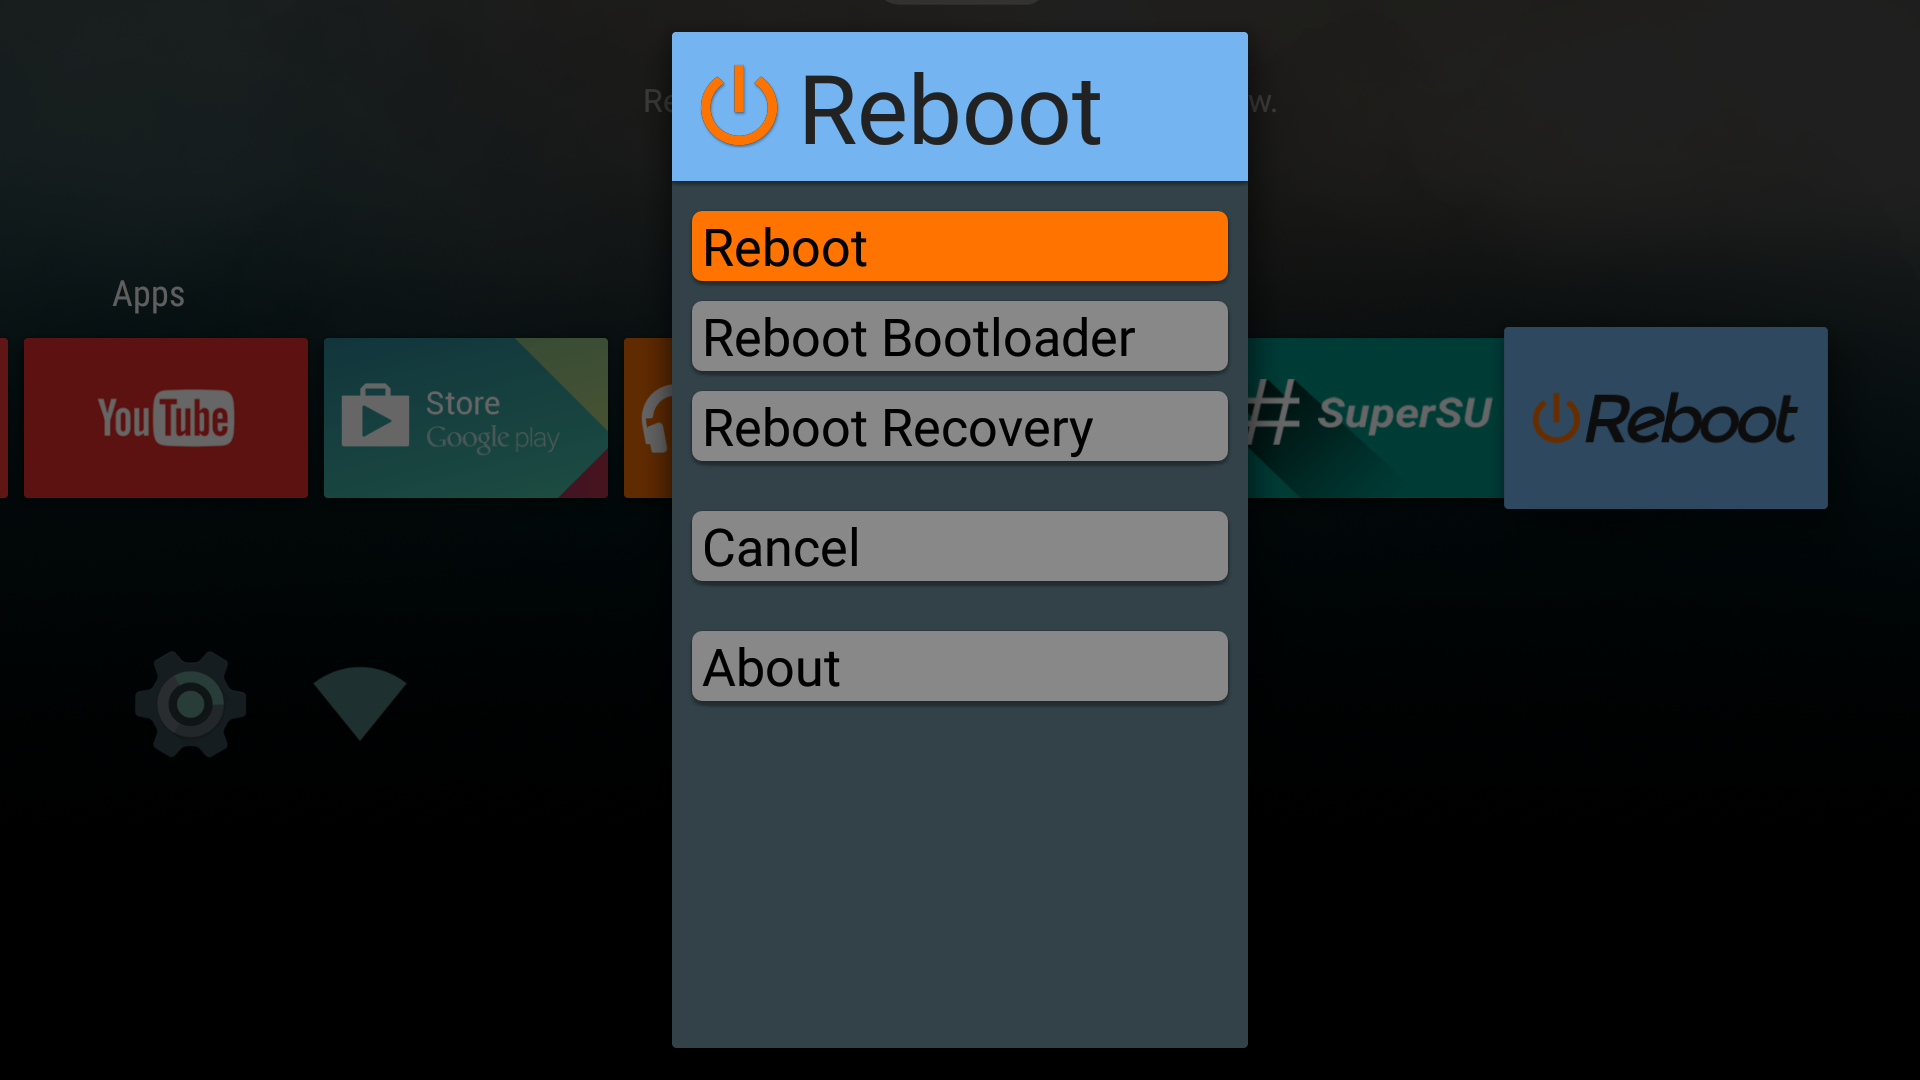 Reboot for android. Reboot андроид. Ребут андроид. Reboot Android. Reboot.